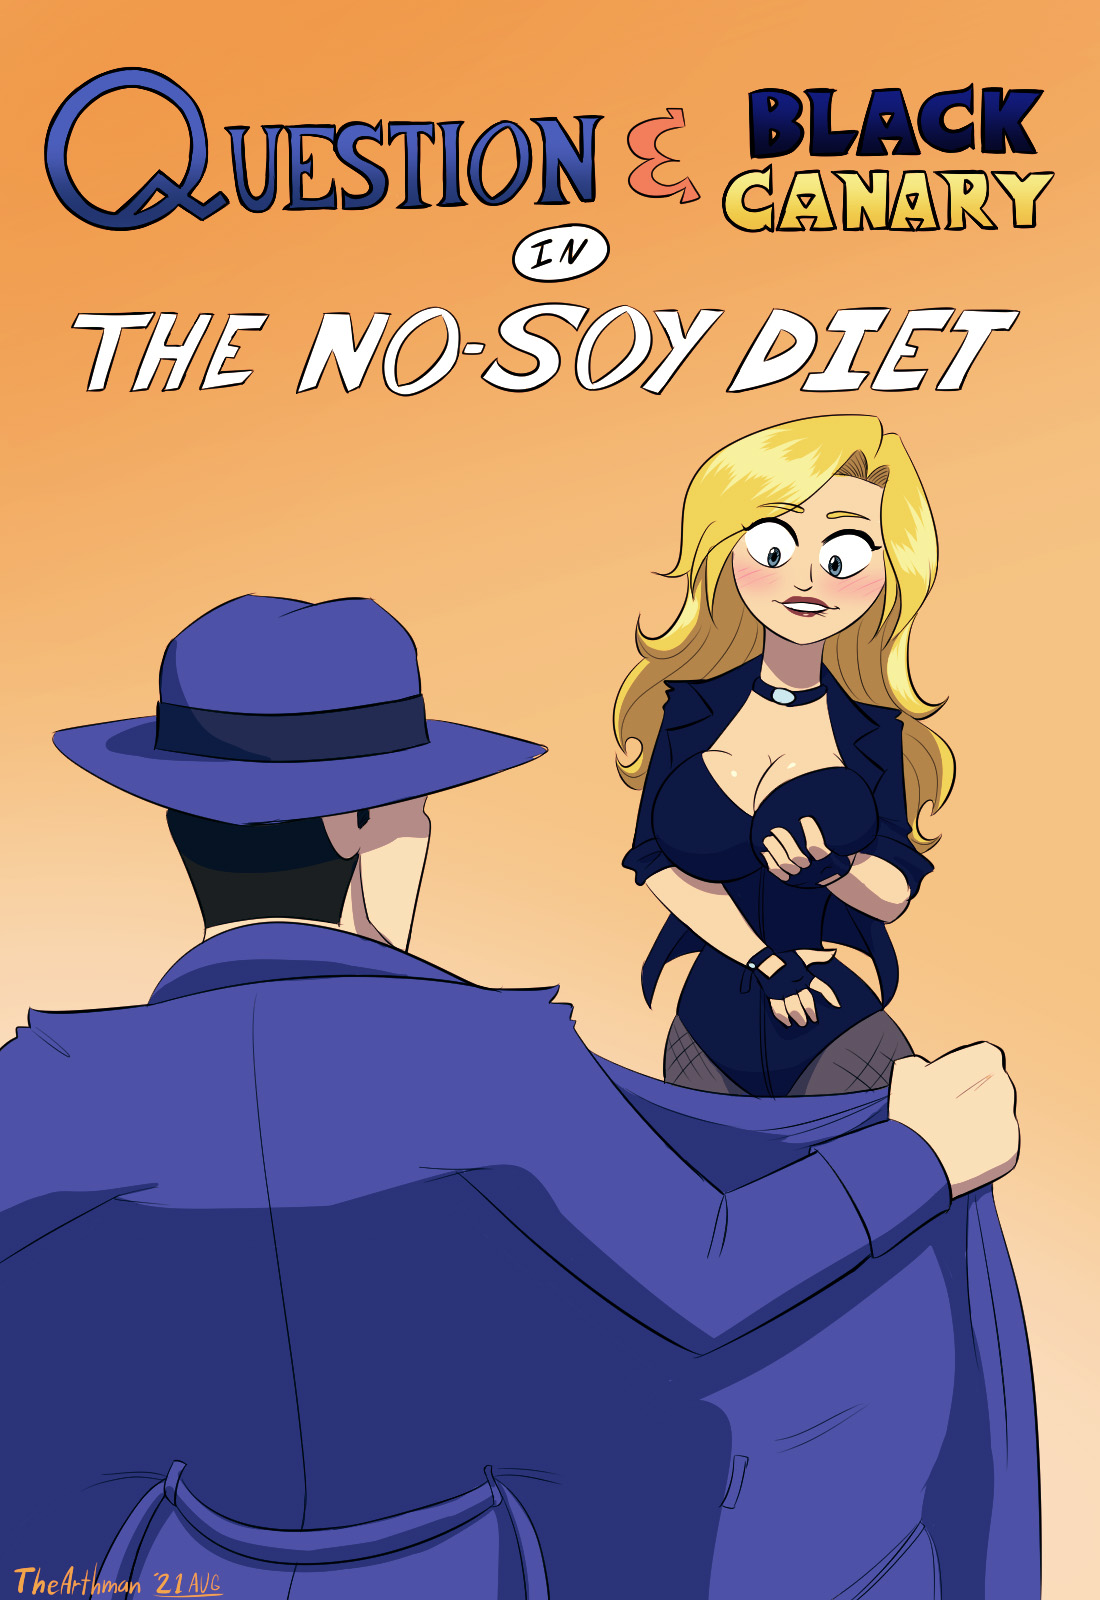 The no soy DIET